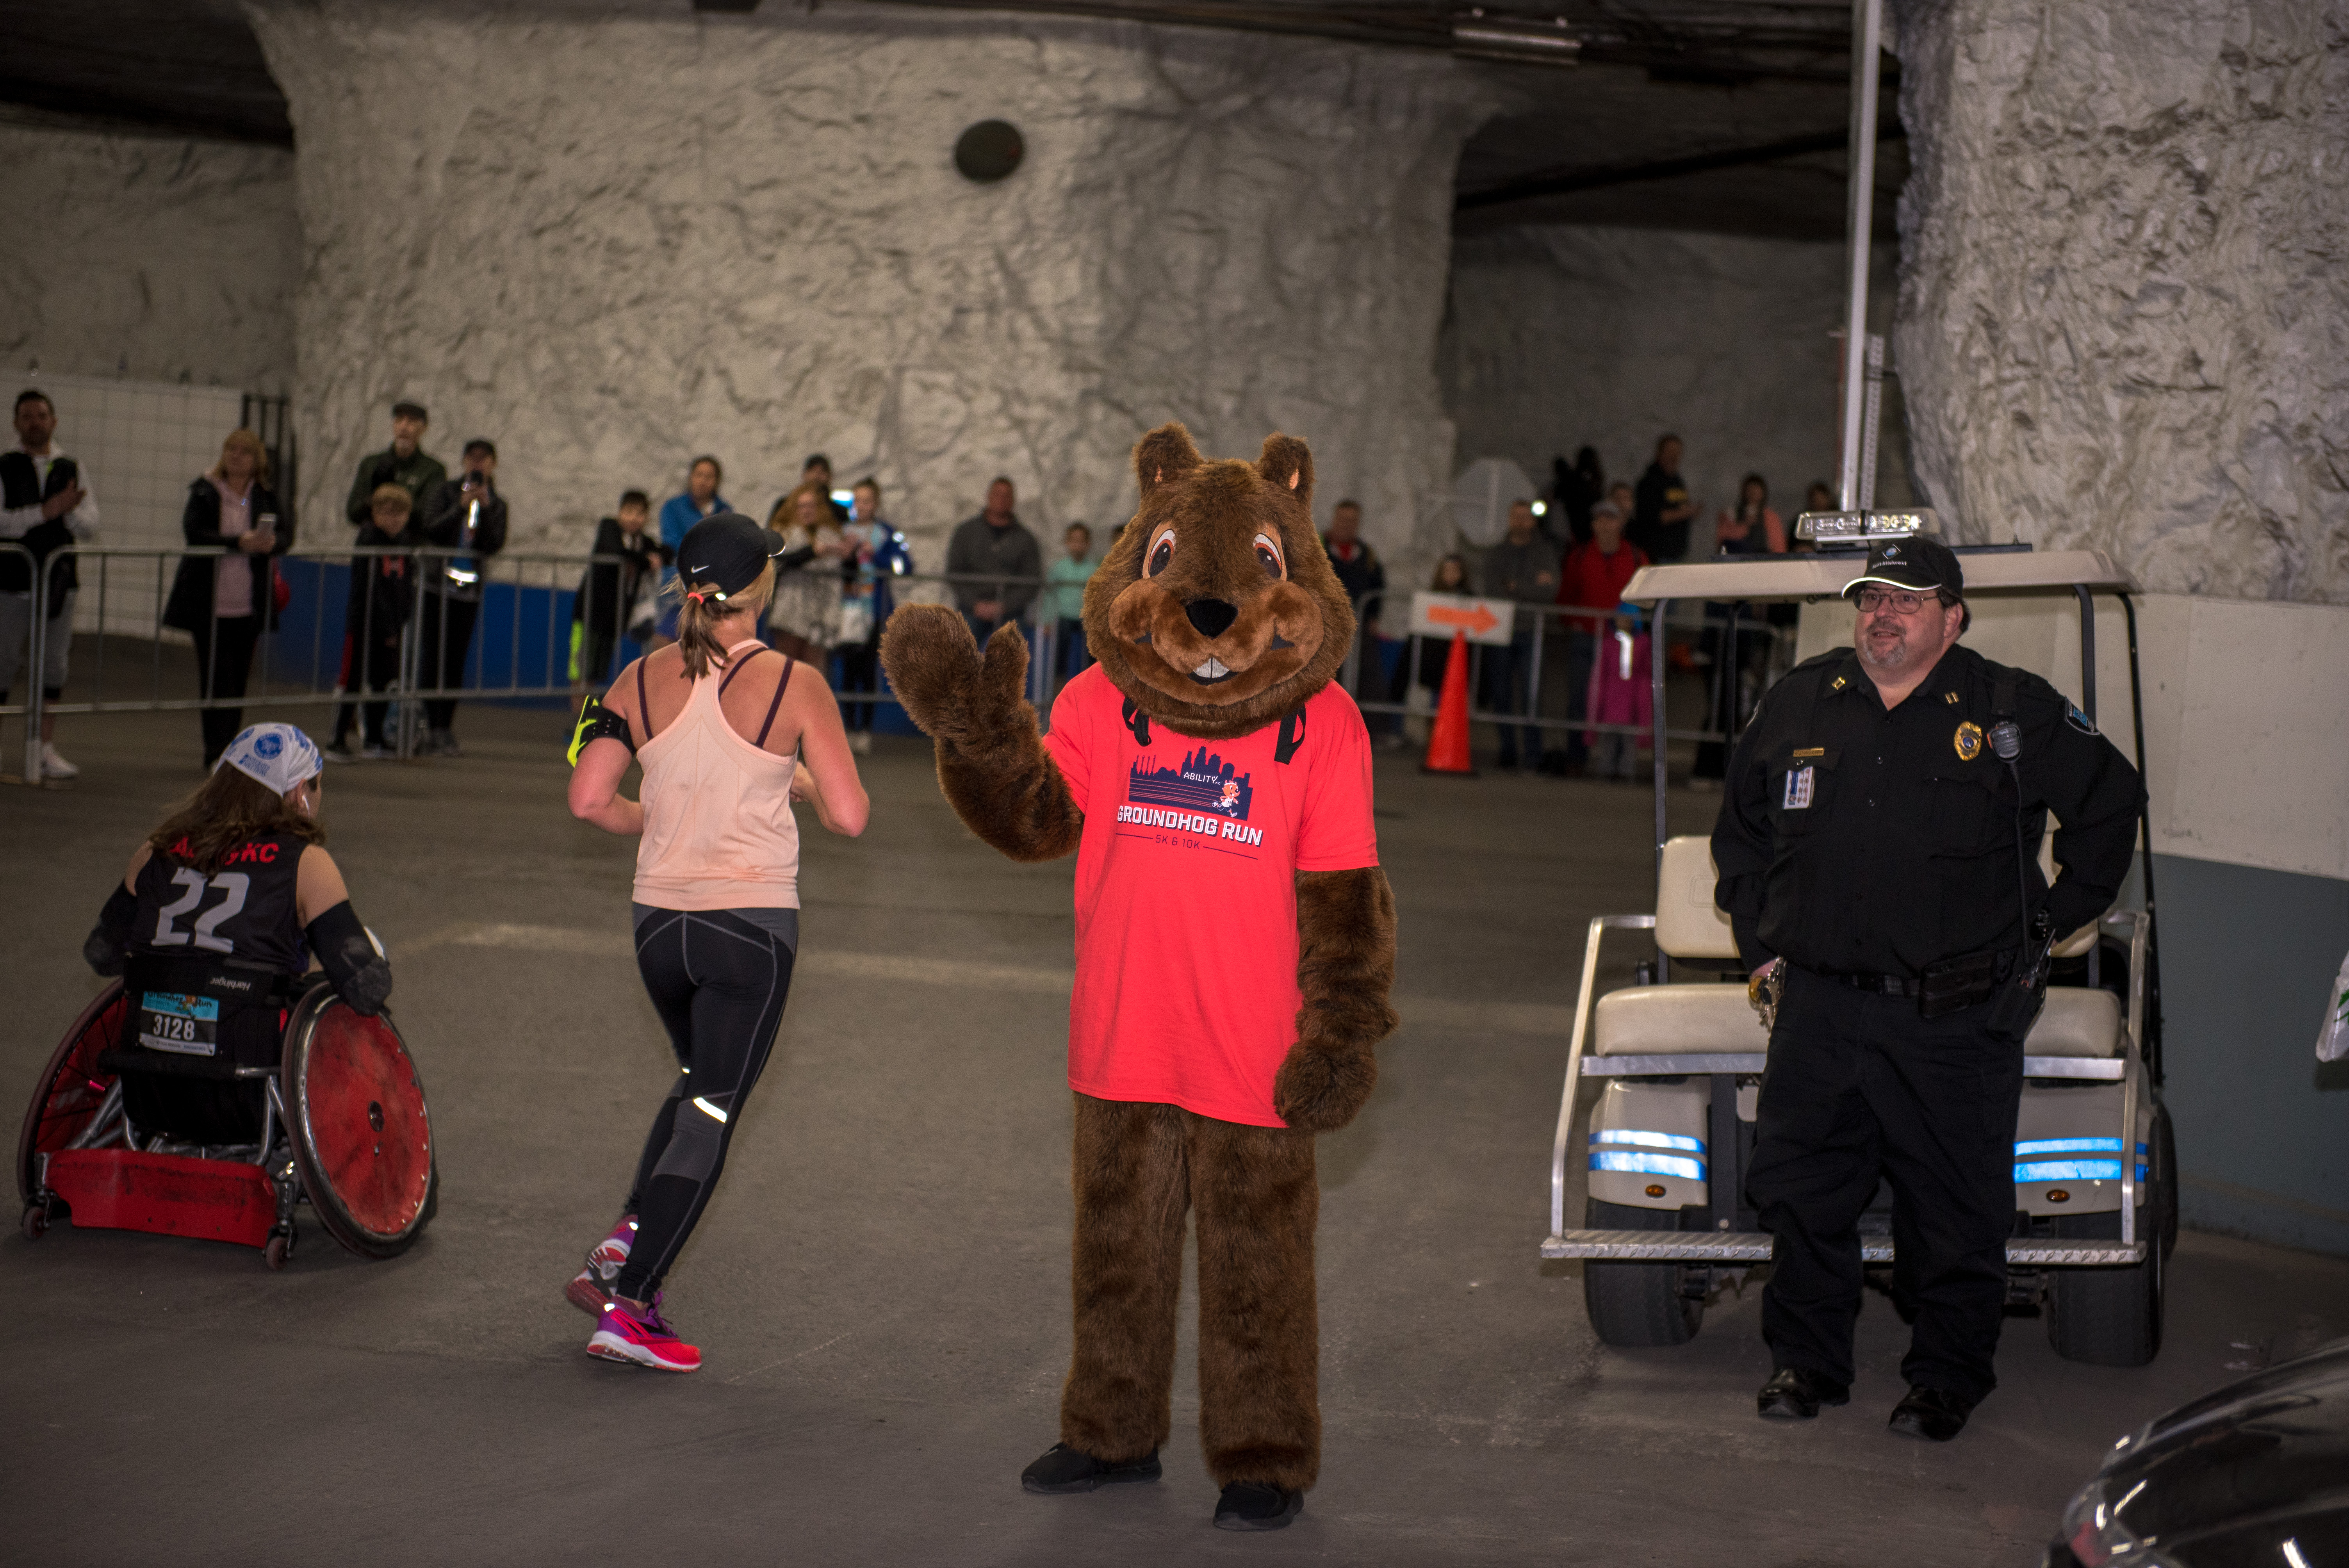 UNIQUE UNDERGROUND 5K & 10K ‘GROUNDHOG RUN’ BENEFITING CHILDREN WITH DISABILITIES AT ABILITY KC® RETURNS THIS JANUARY FOR ITS 41ST RUN  AT THE HUNT MIDWEST SUBTROPOLIS®